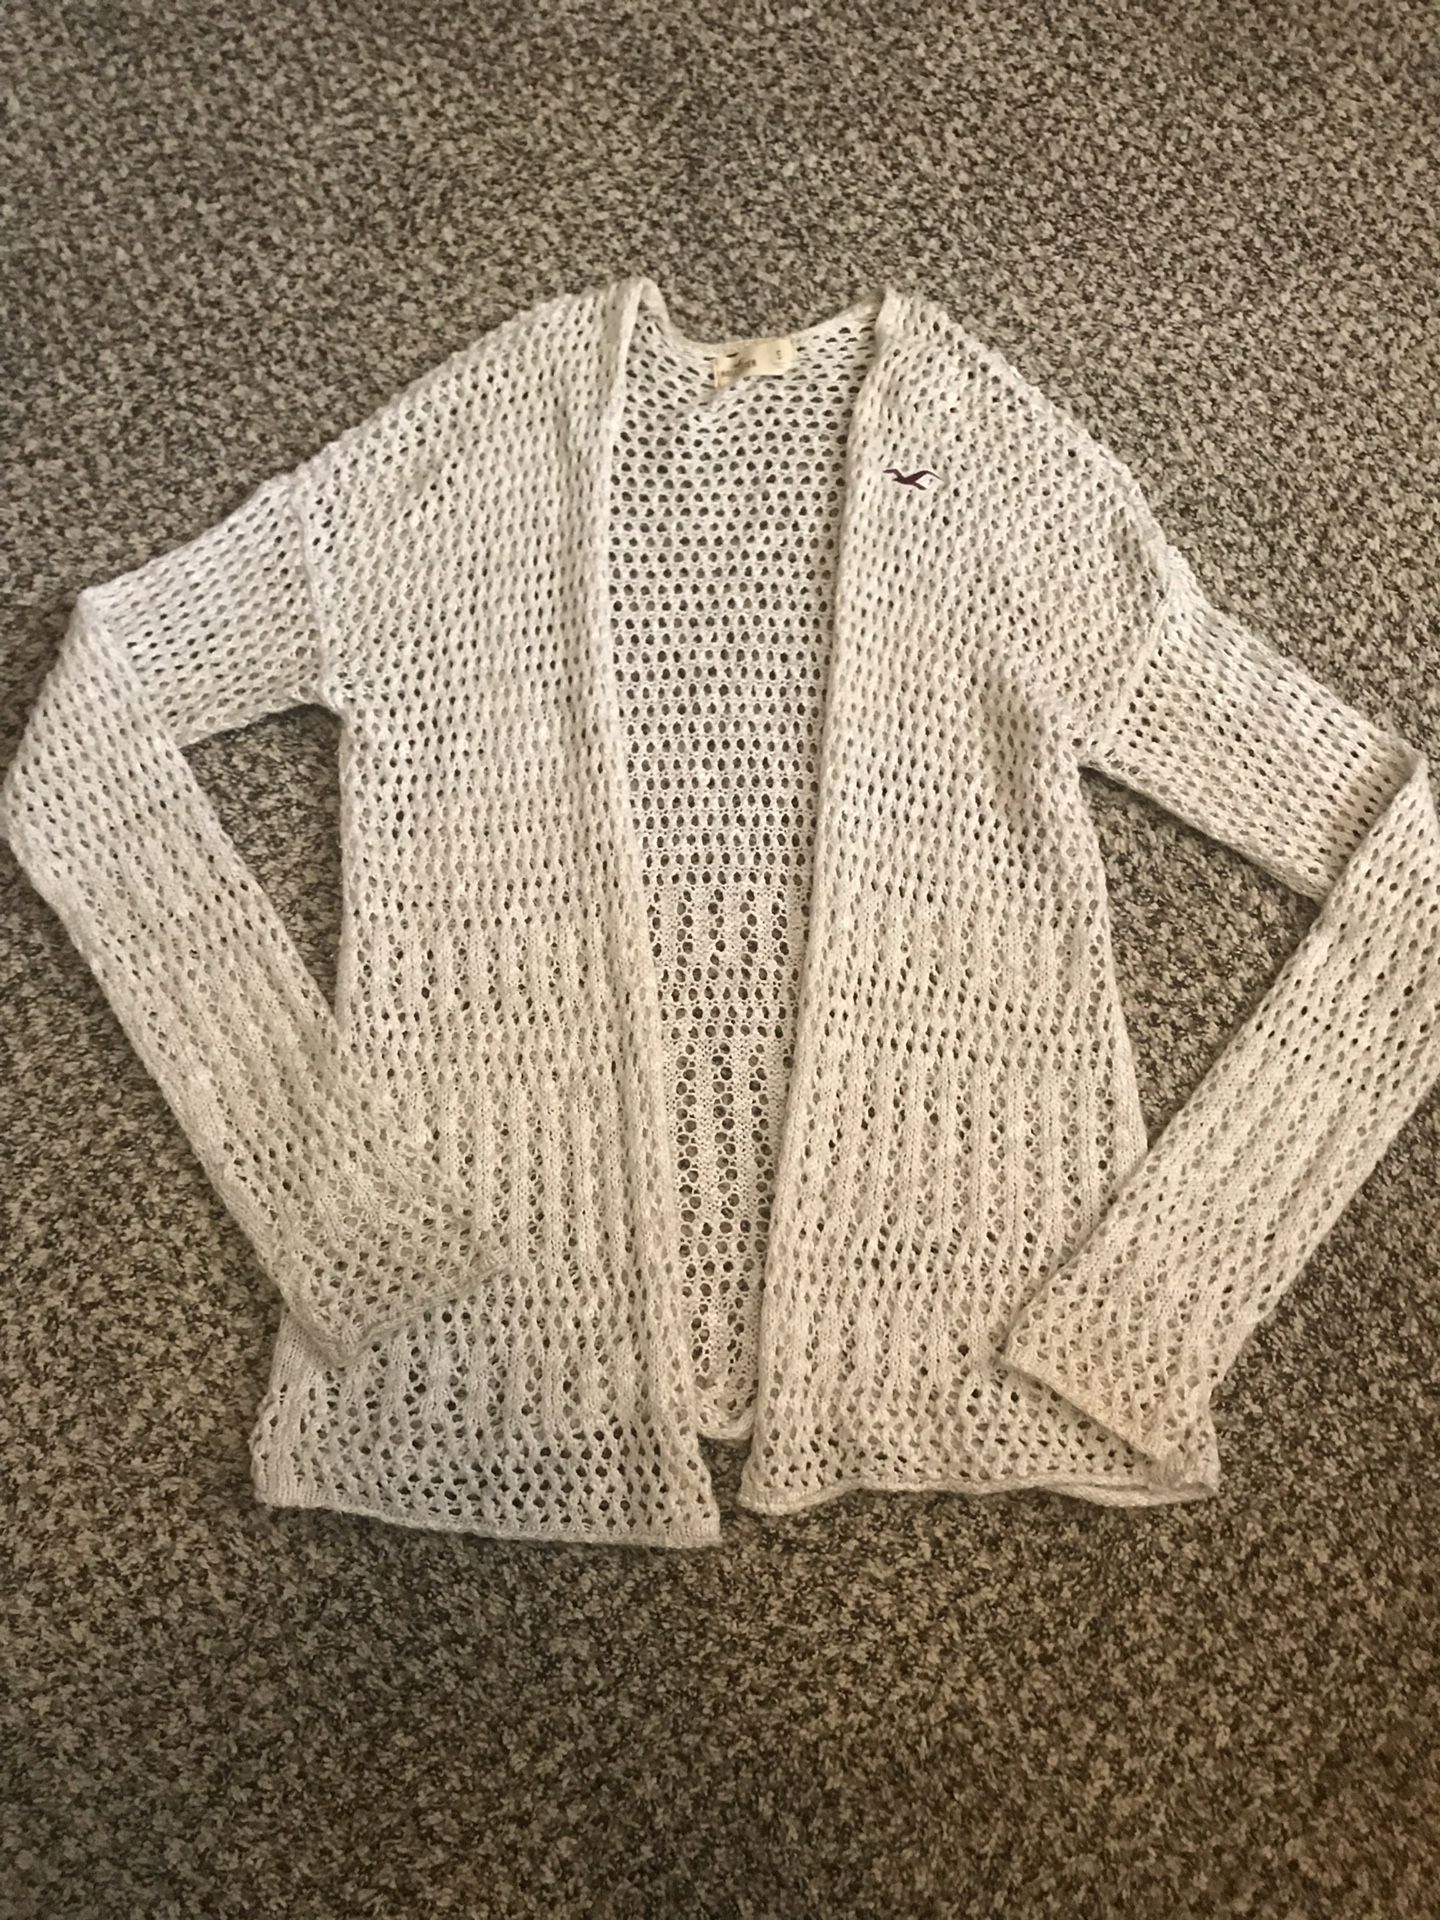 Hollister sweater size Small